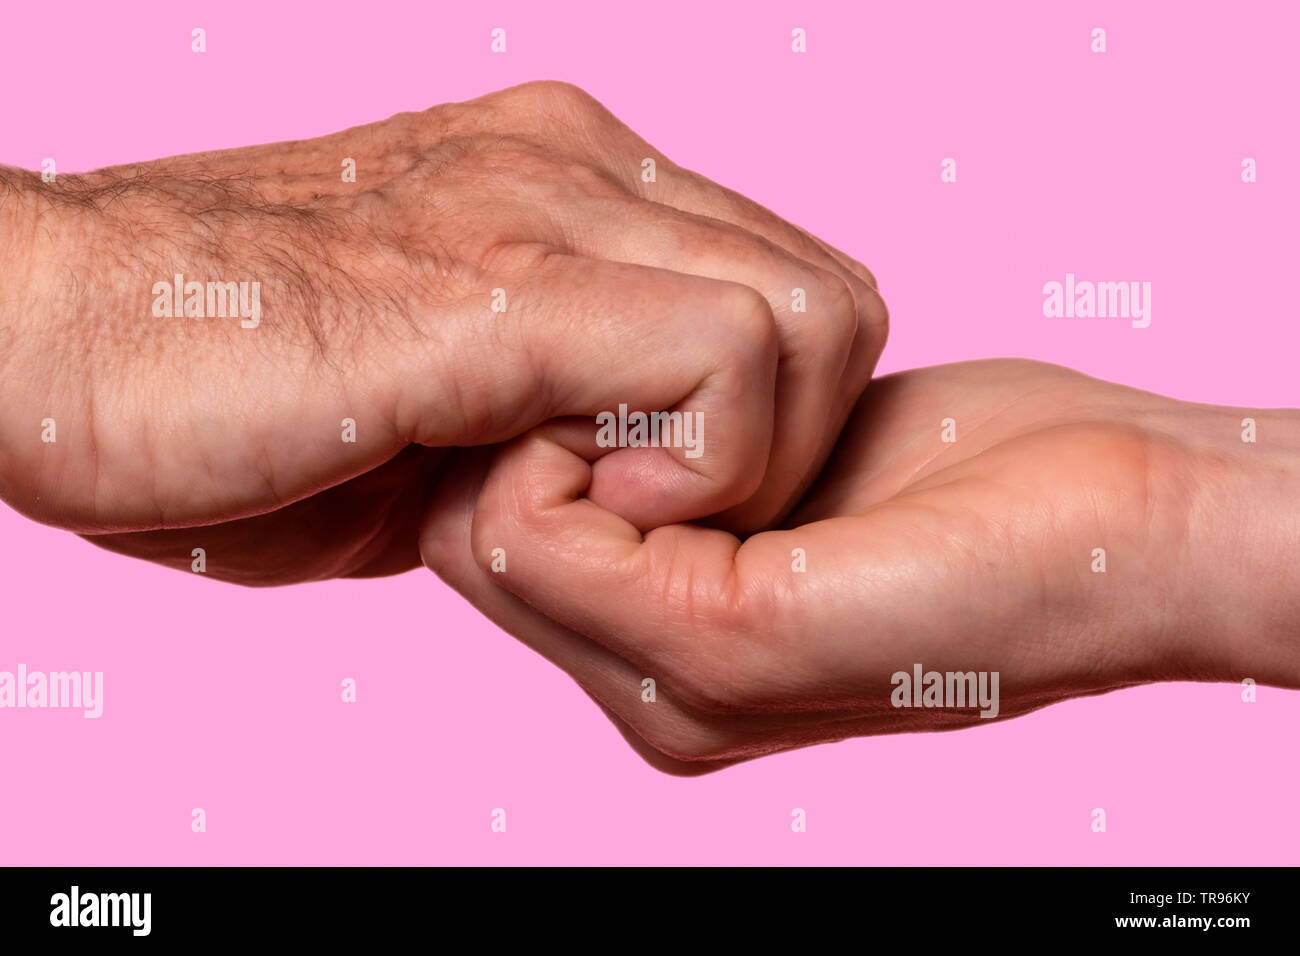 male and female hands gripping each other Stock Photo